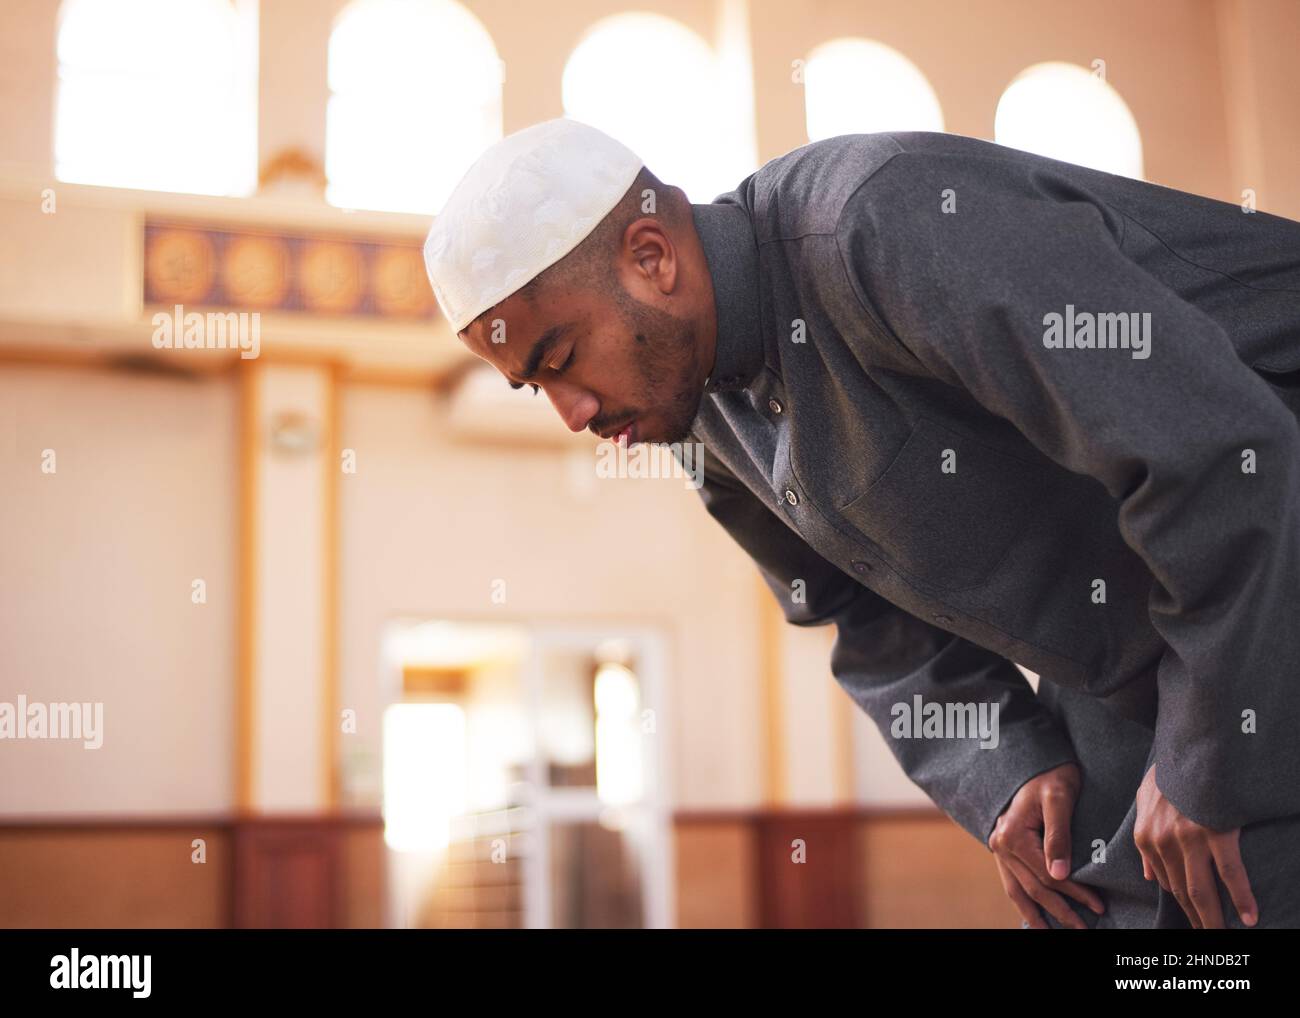 A side view of a Muslim man bowing during prayers at a mosque  Stock Photo